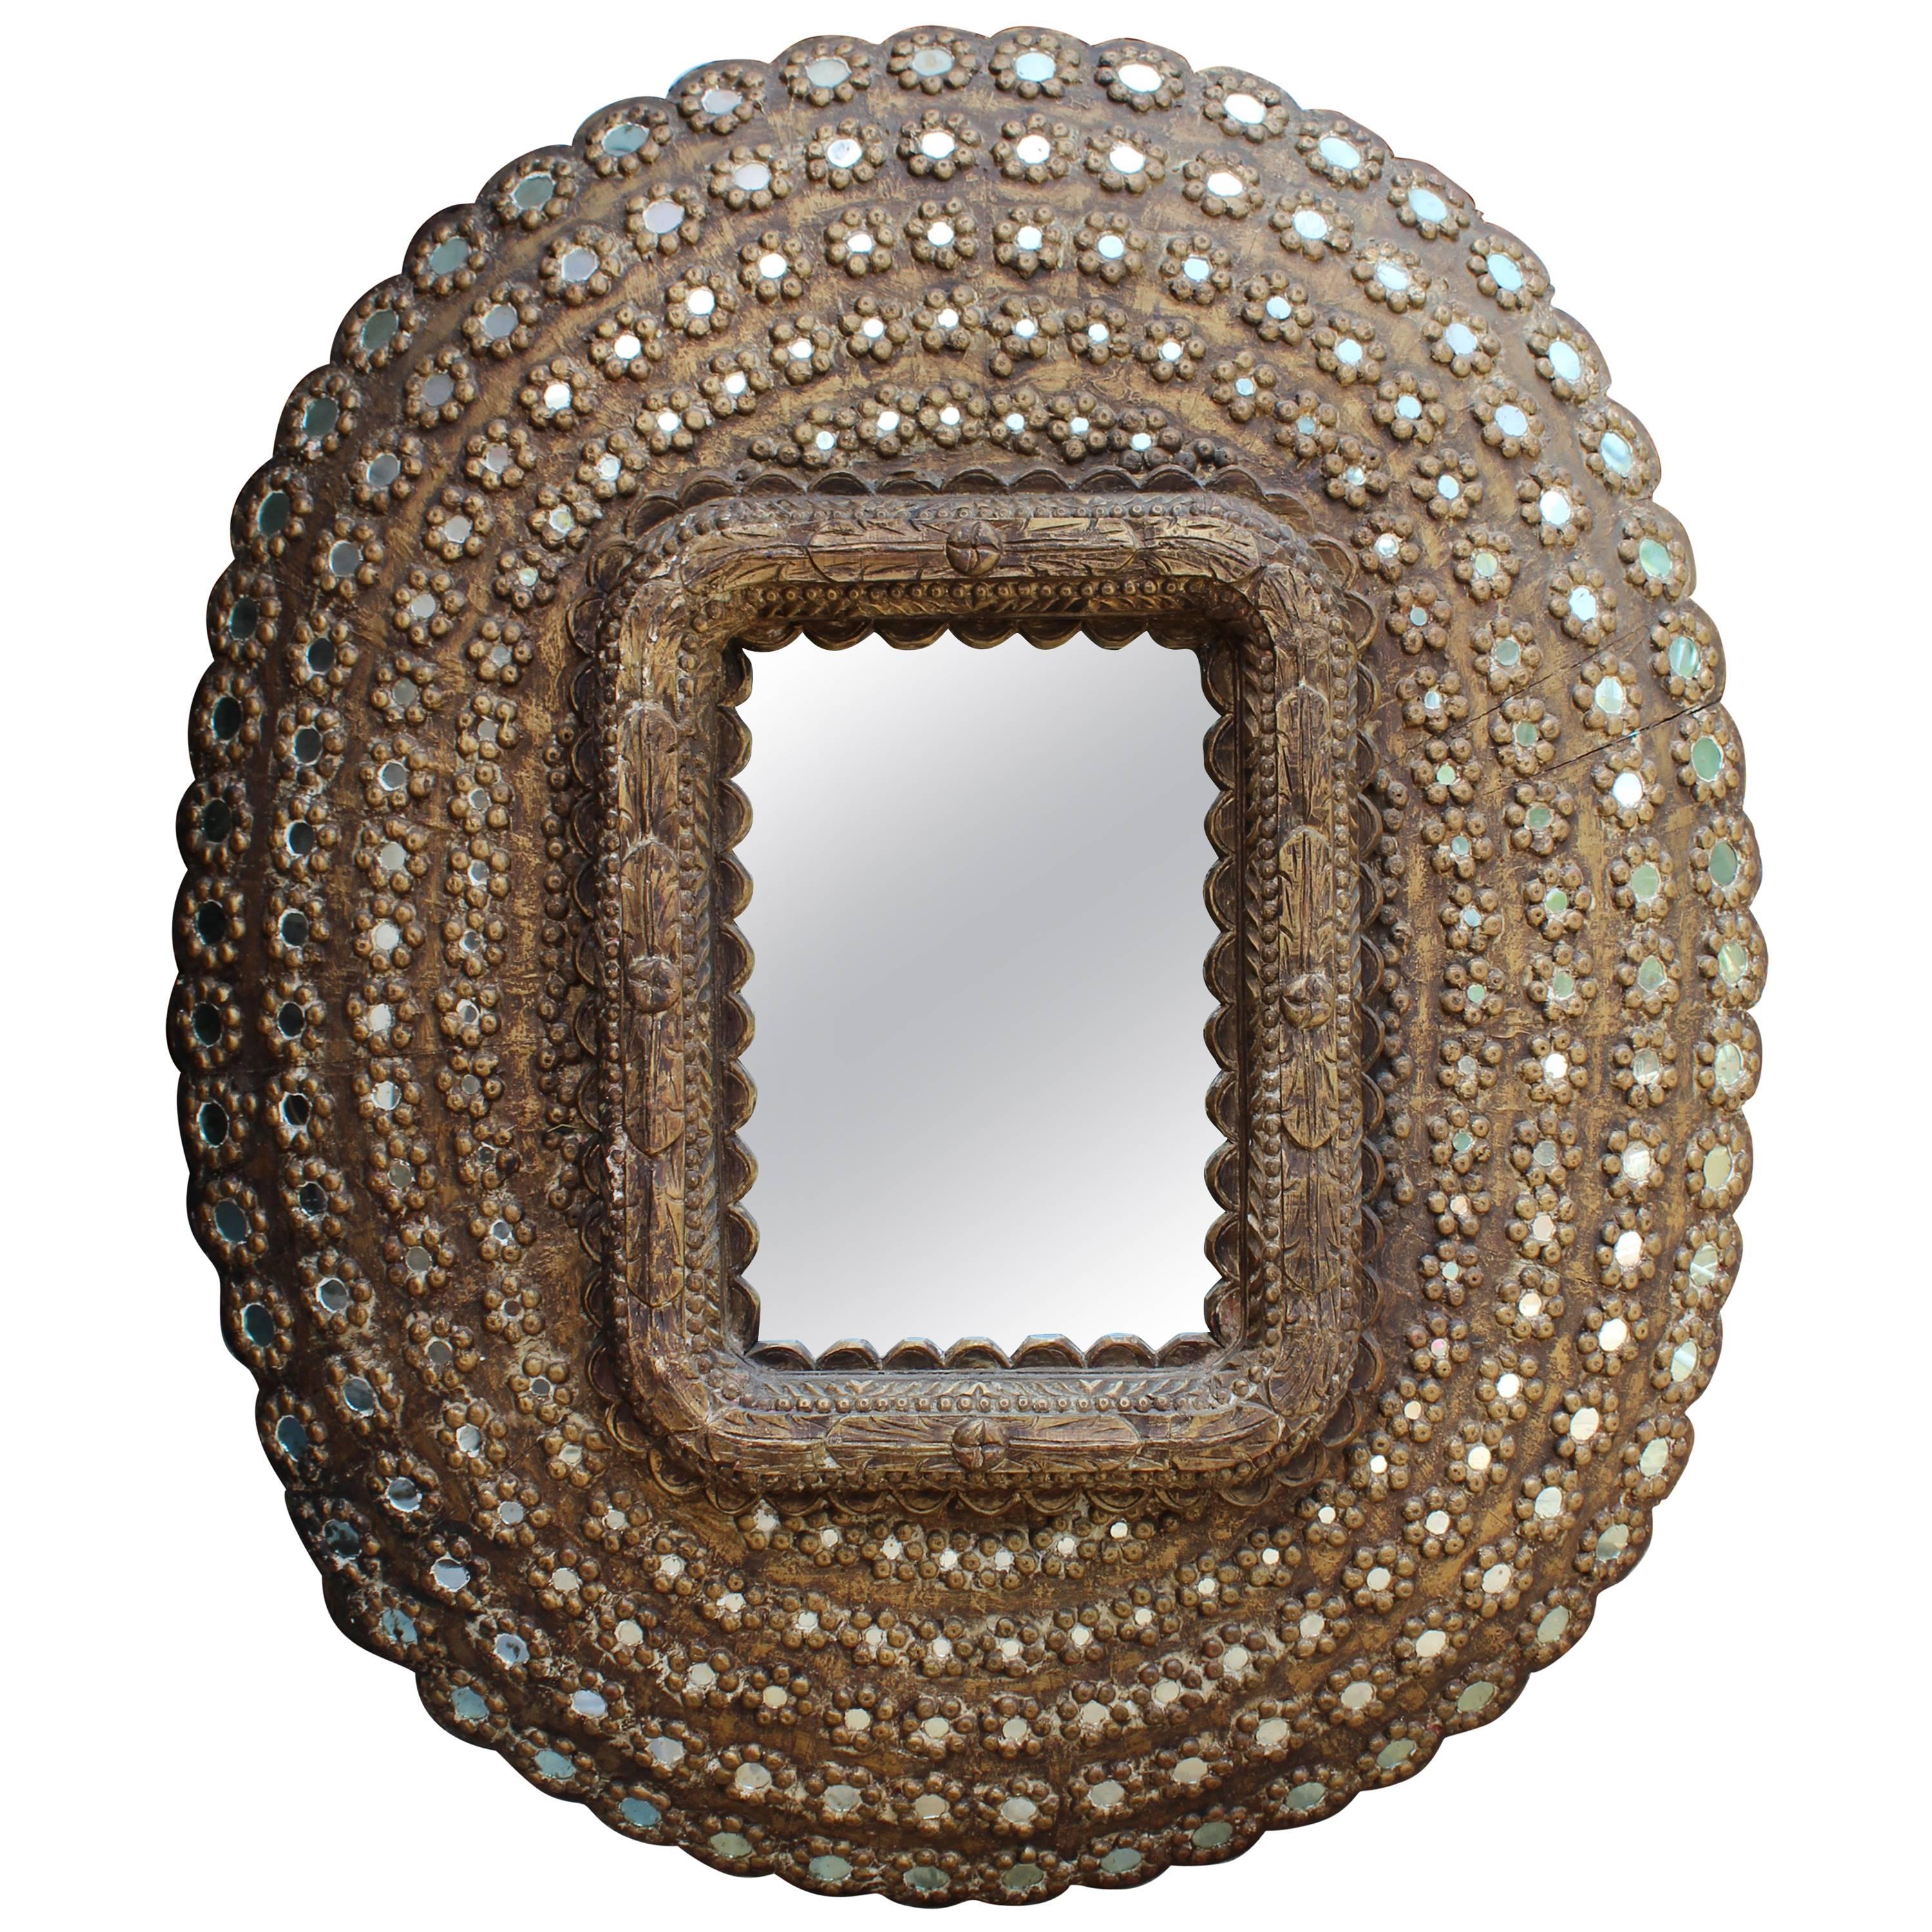 Indian Mirror and Hand-Carved Wooden Inlayed Frame